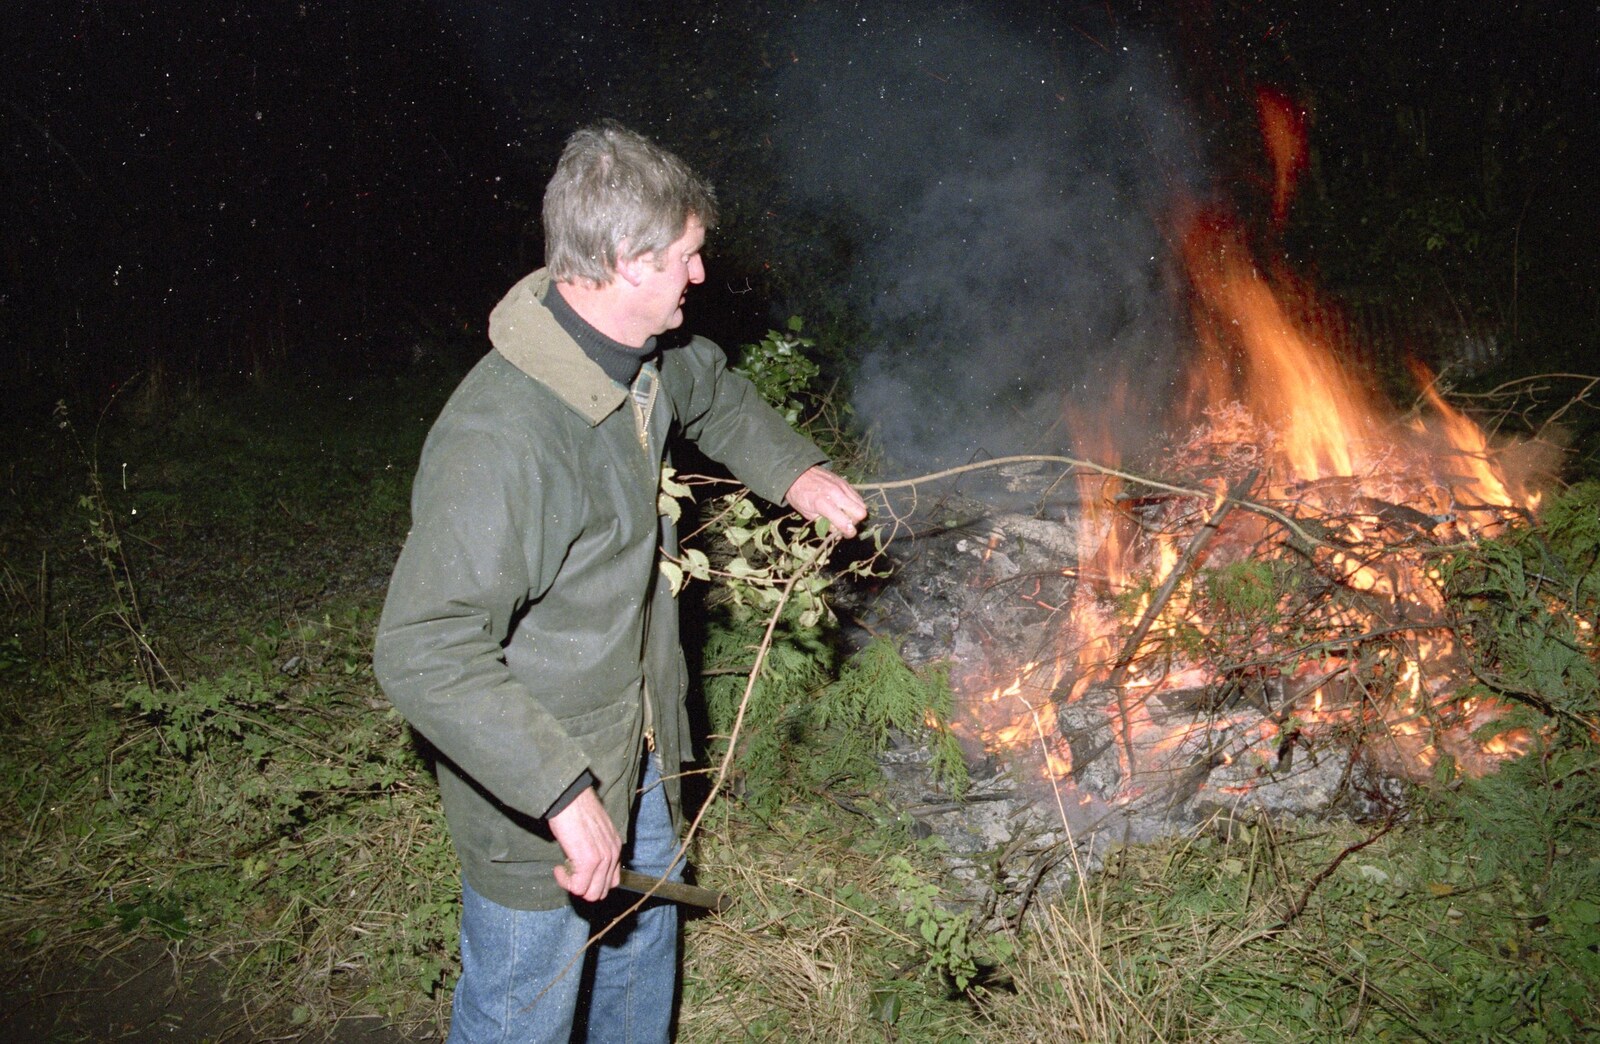 Geoff pokes the fire with a stick from Bonfire Night and Printec at the Stoke Ash White Horse, Suffolk - 5th November 1991